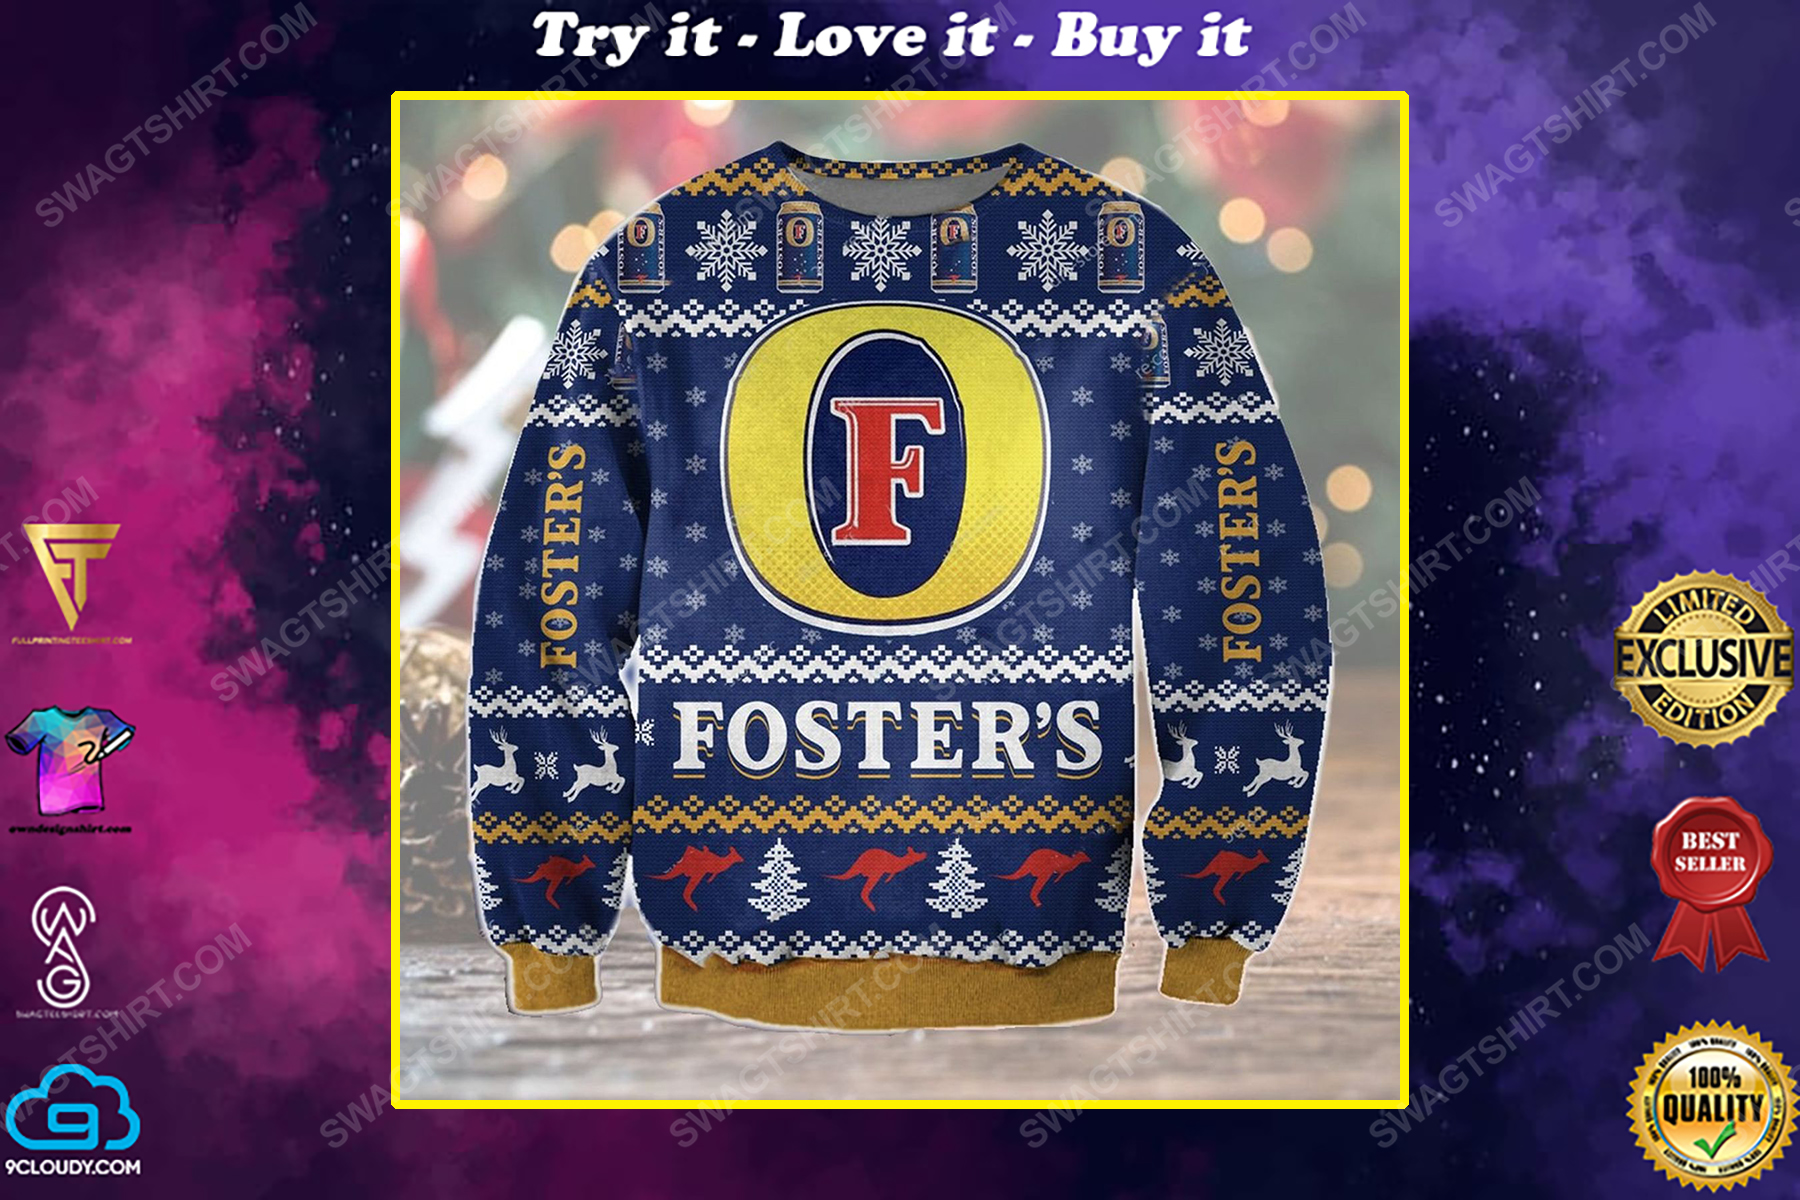 The fosters lager beer ugly christmas sweater